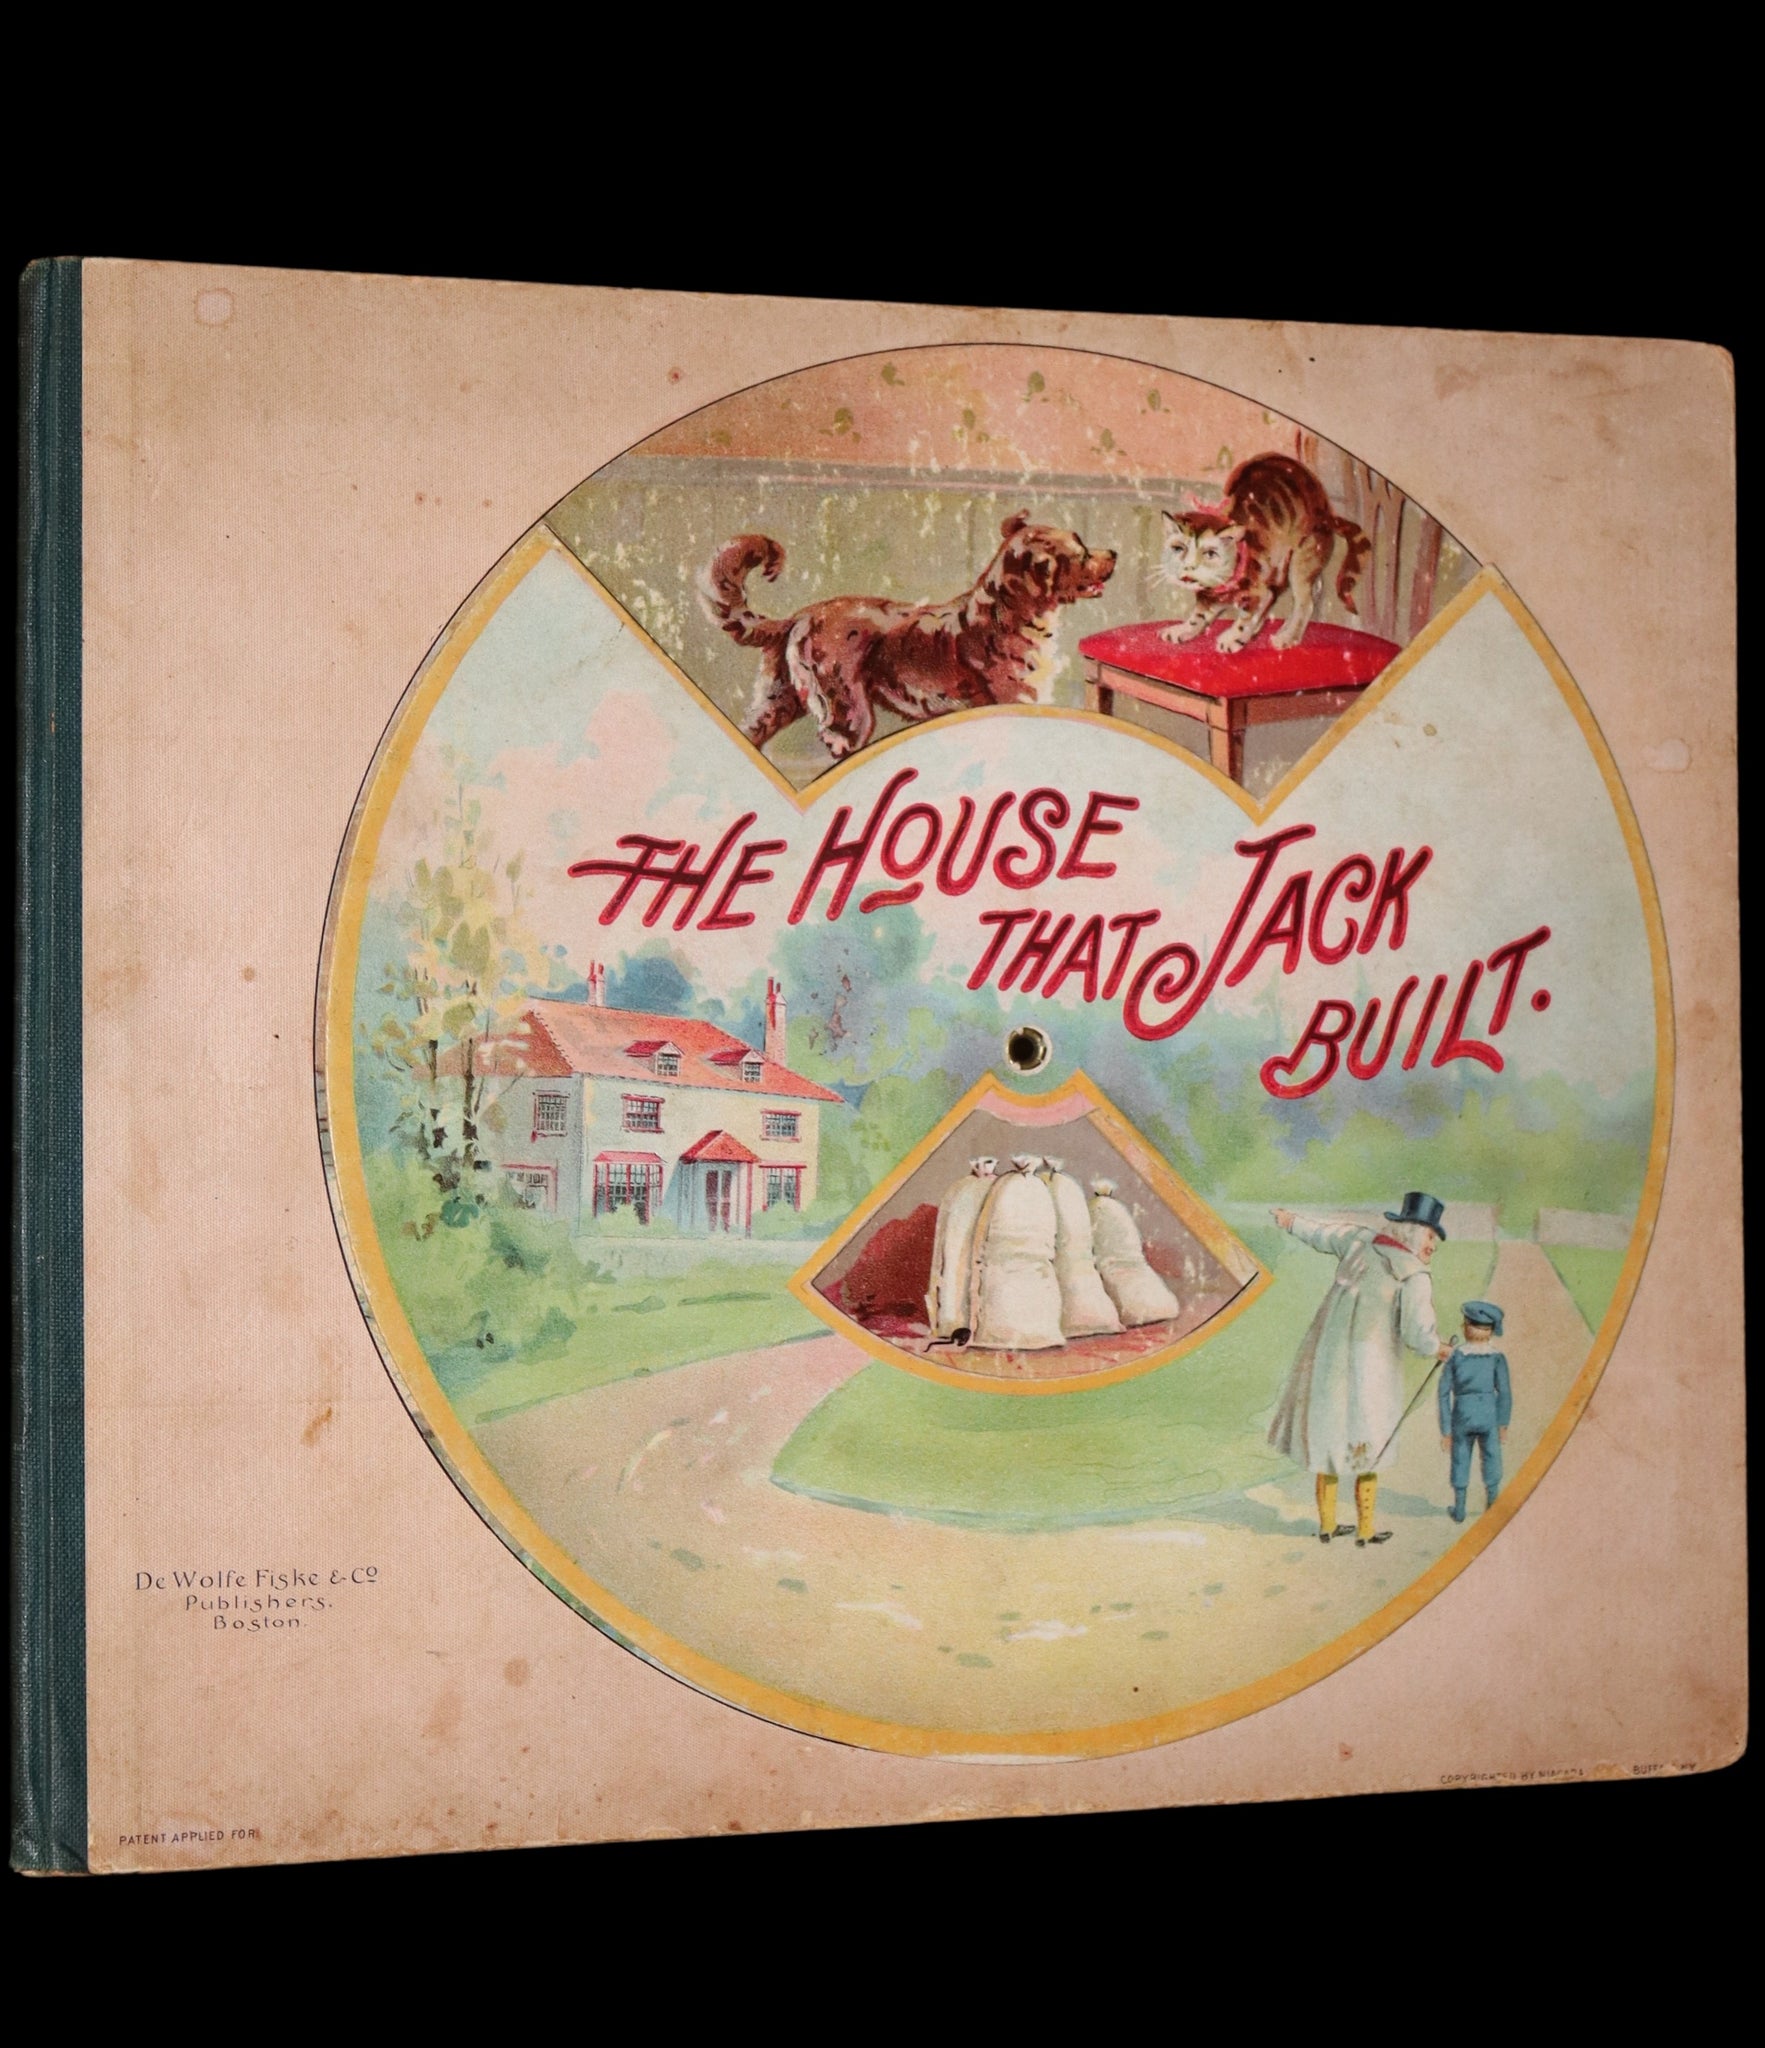 1899 De Wolfe & Fiske Revolving Toy Book - THE HOUSE THAT JACK BUILT with a nice volvelle cover.